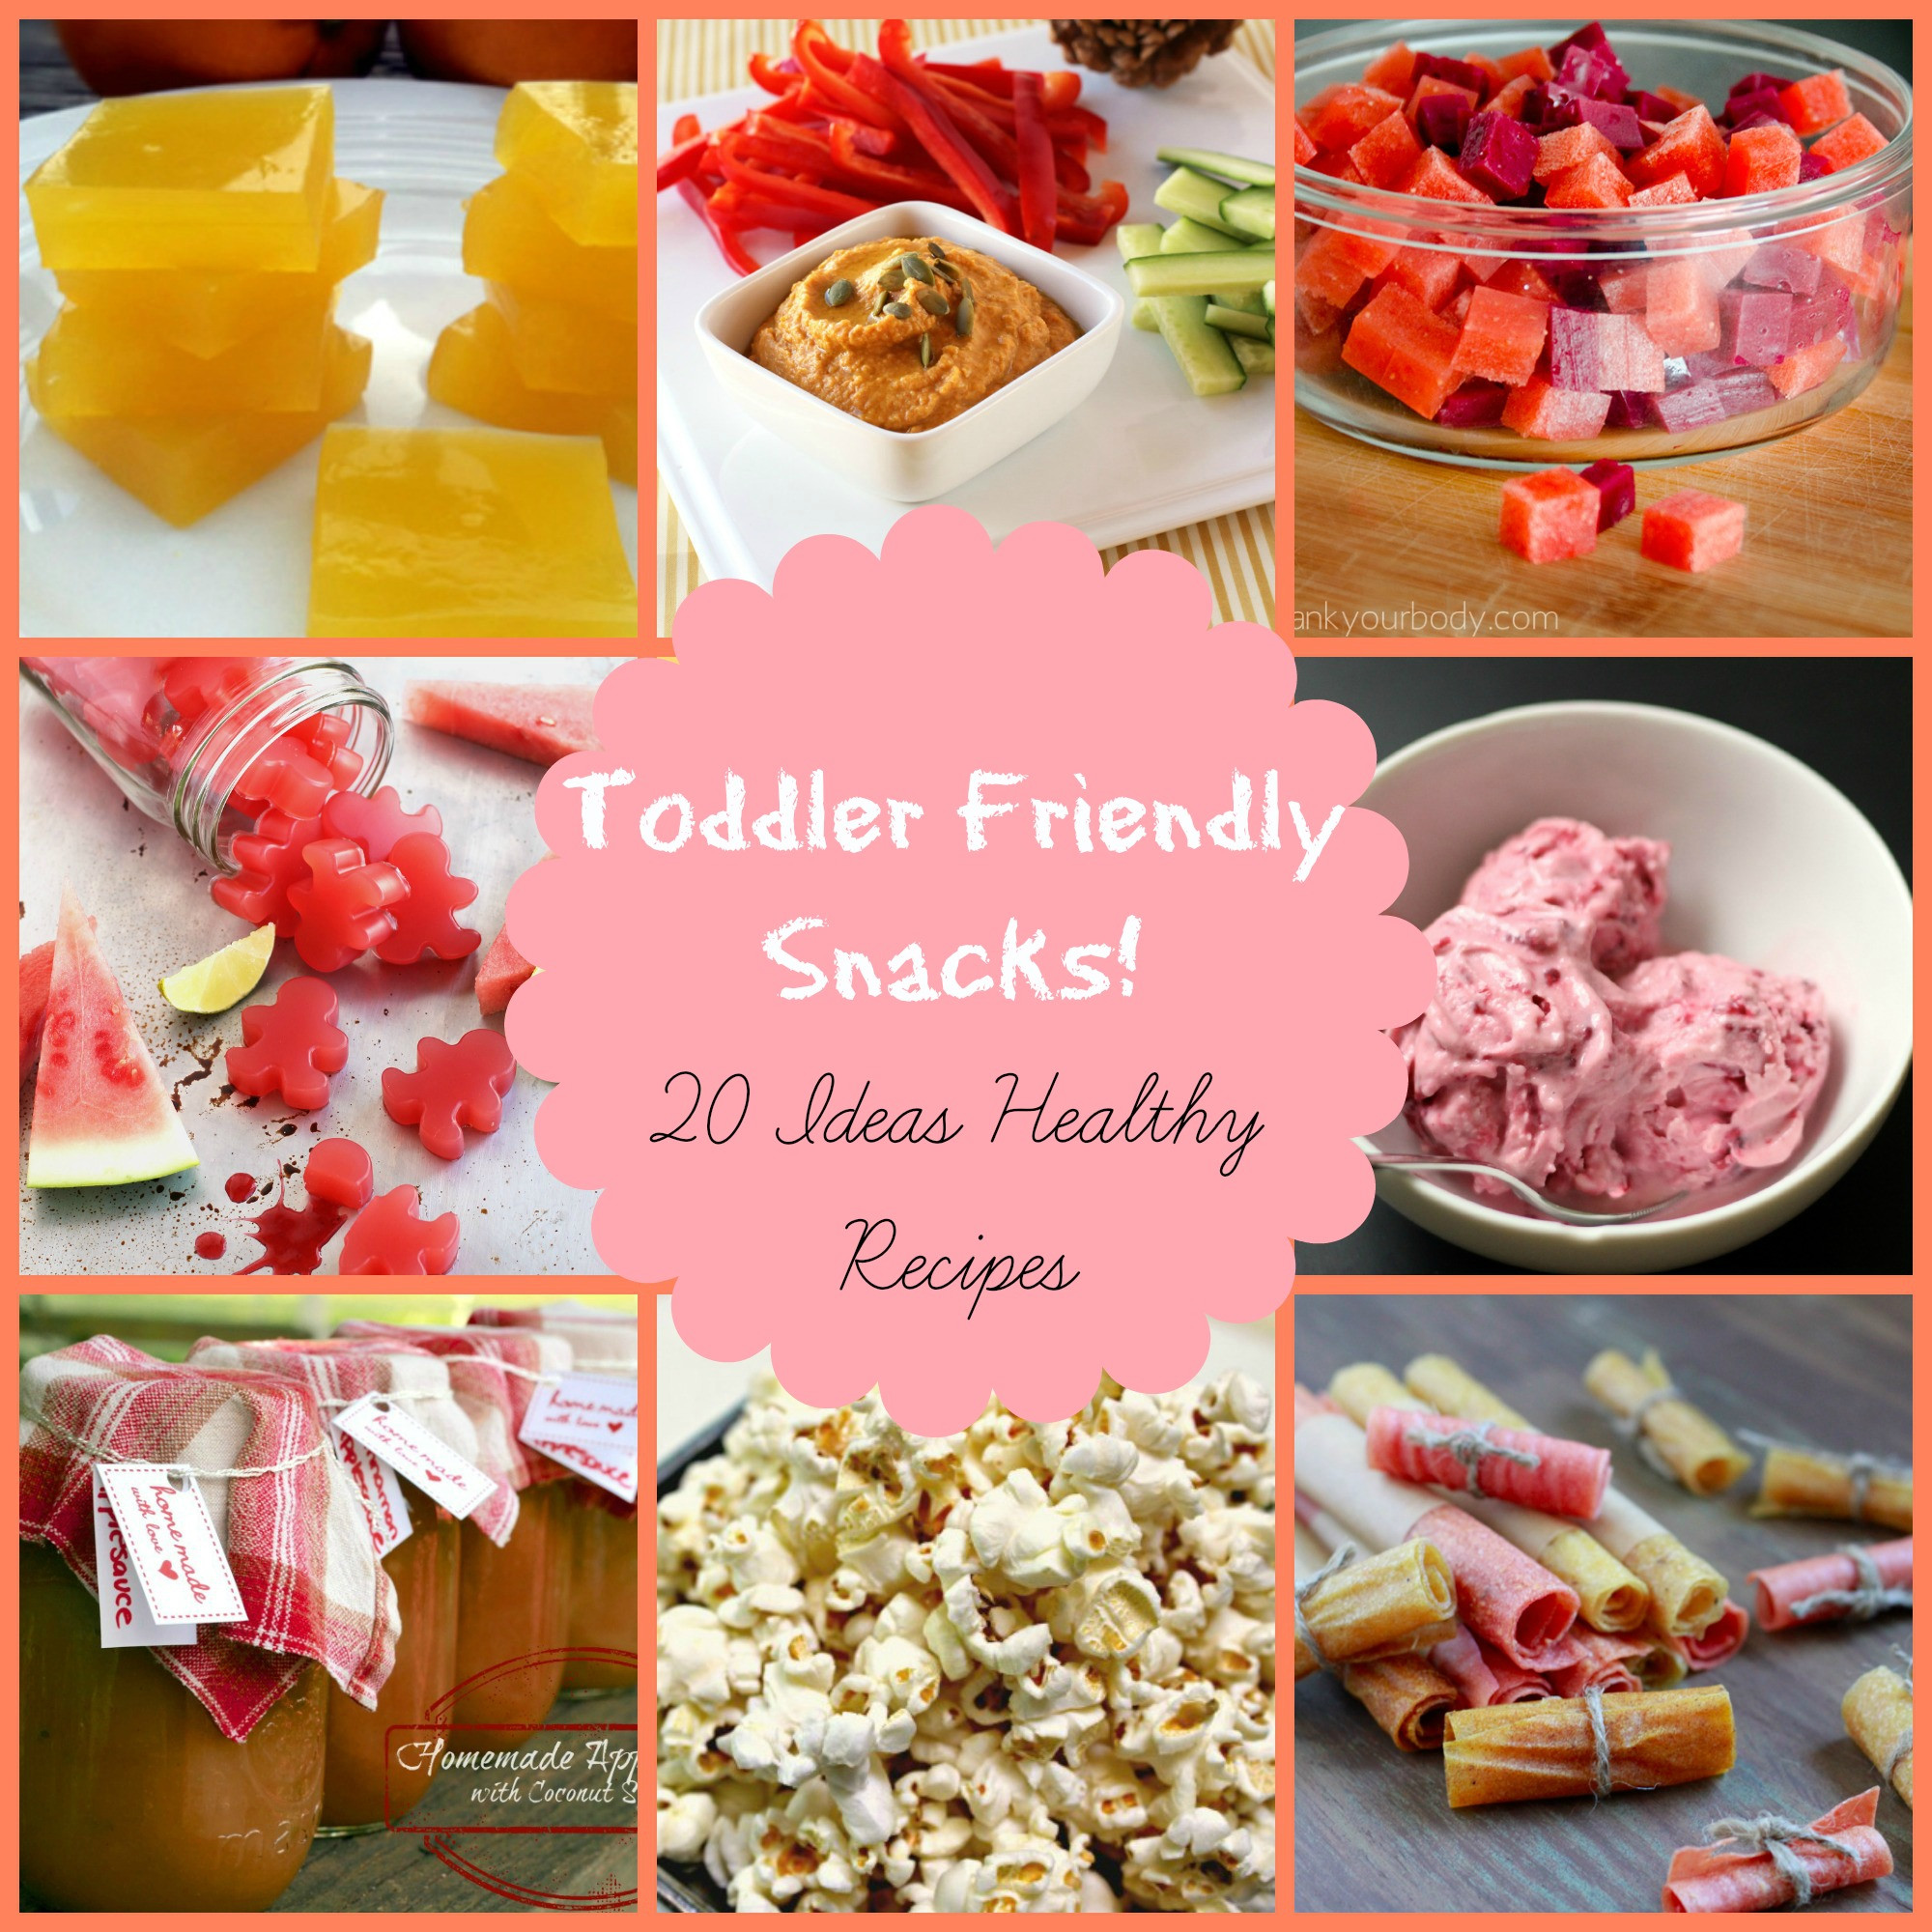 Cheap Healthy Snacks For Kids
 Healthy Snacks for Kids 20 toddler friendly ideas